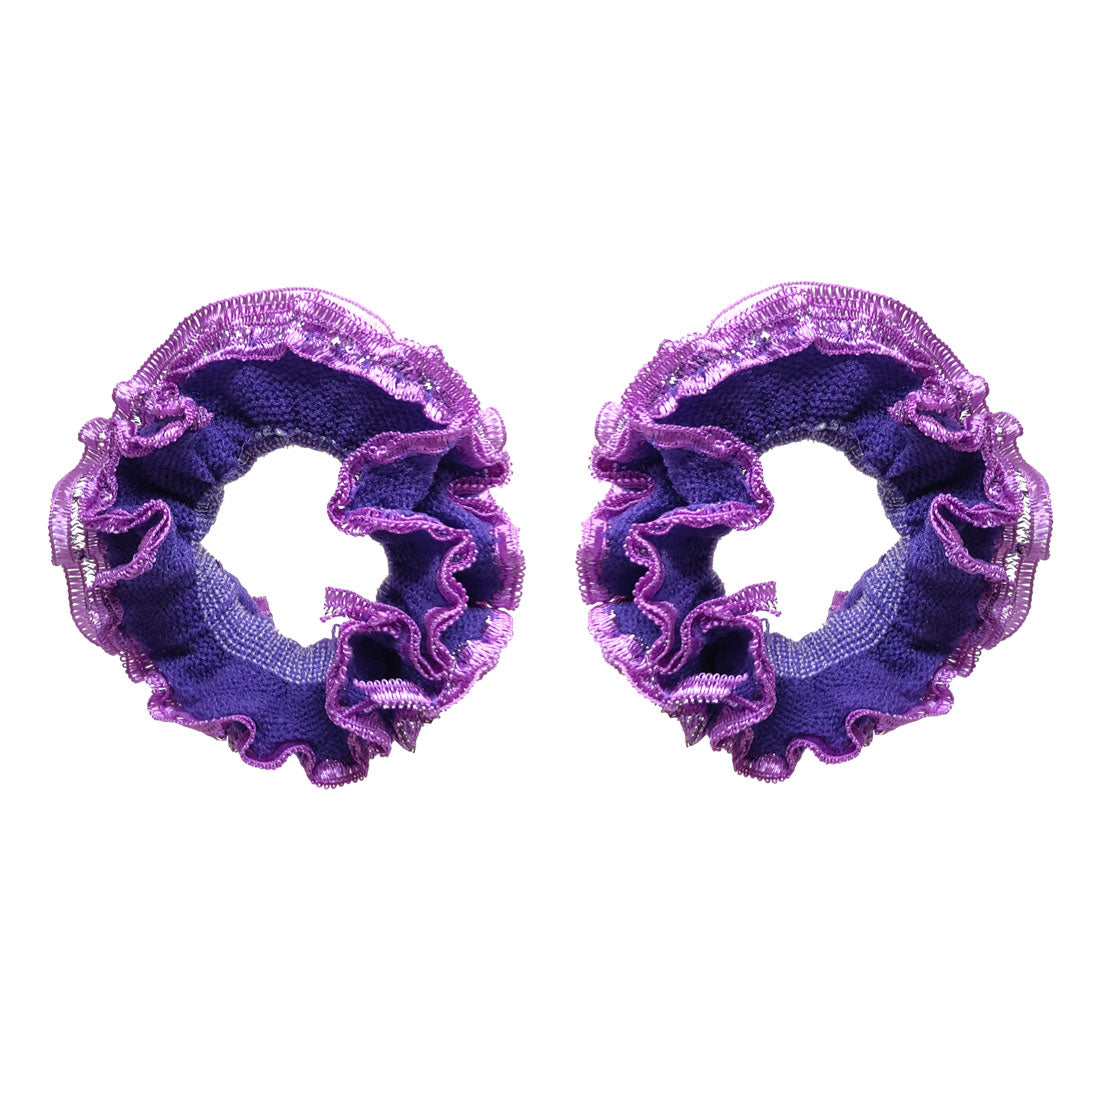 Anokhi Ada Hair Ties/ Ponytail Holders for Girls and Women (Set of 2 Ponytail Holders, Purple)-Z J-07